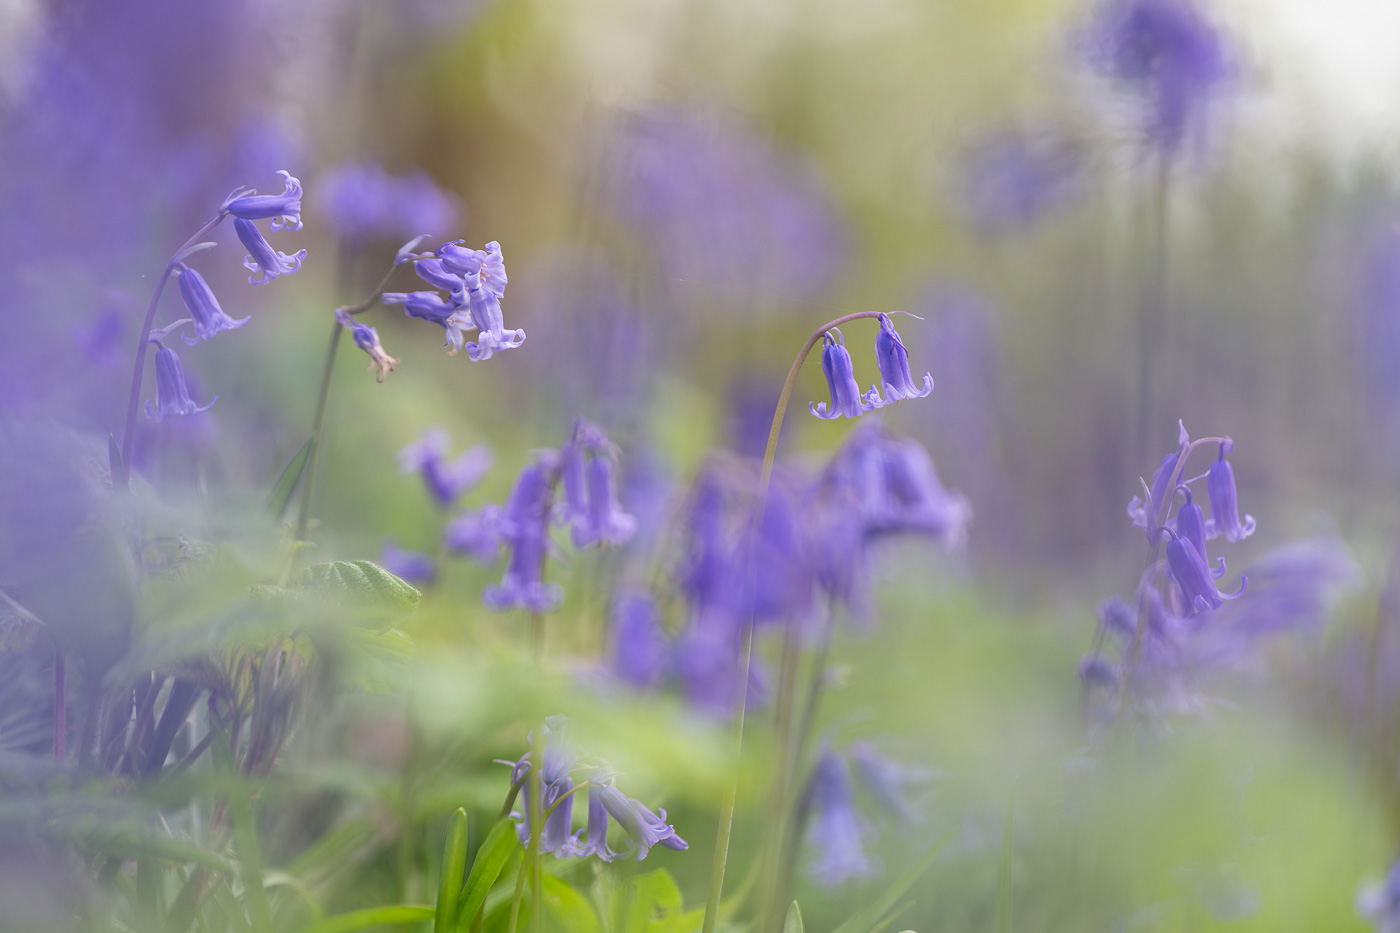 Bluebells captured at 180mm (no crop). Camera settings 1/320 sec. f/2.8. ISO 560